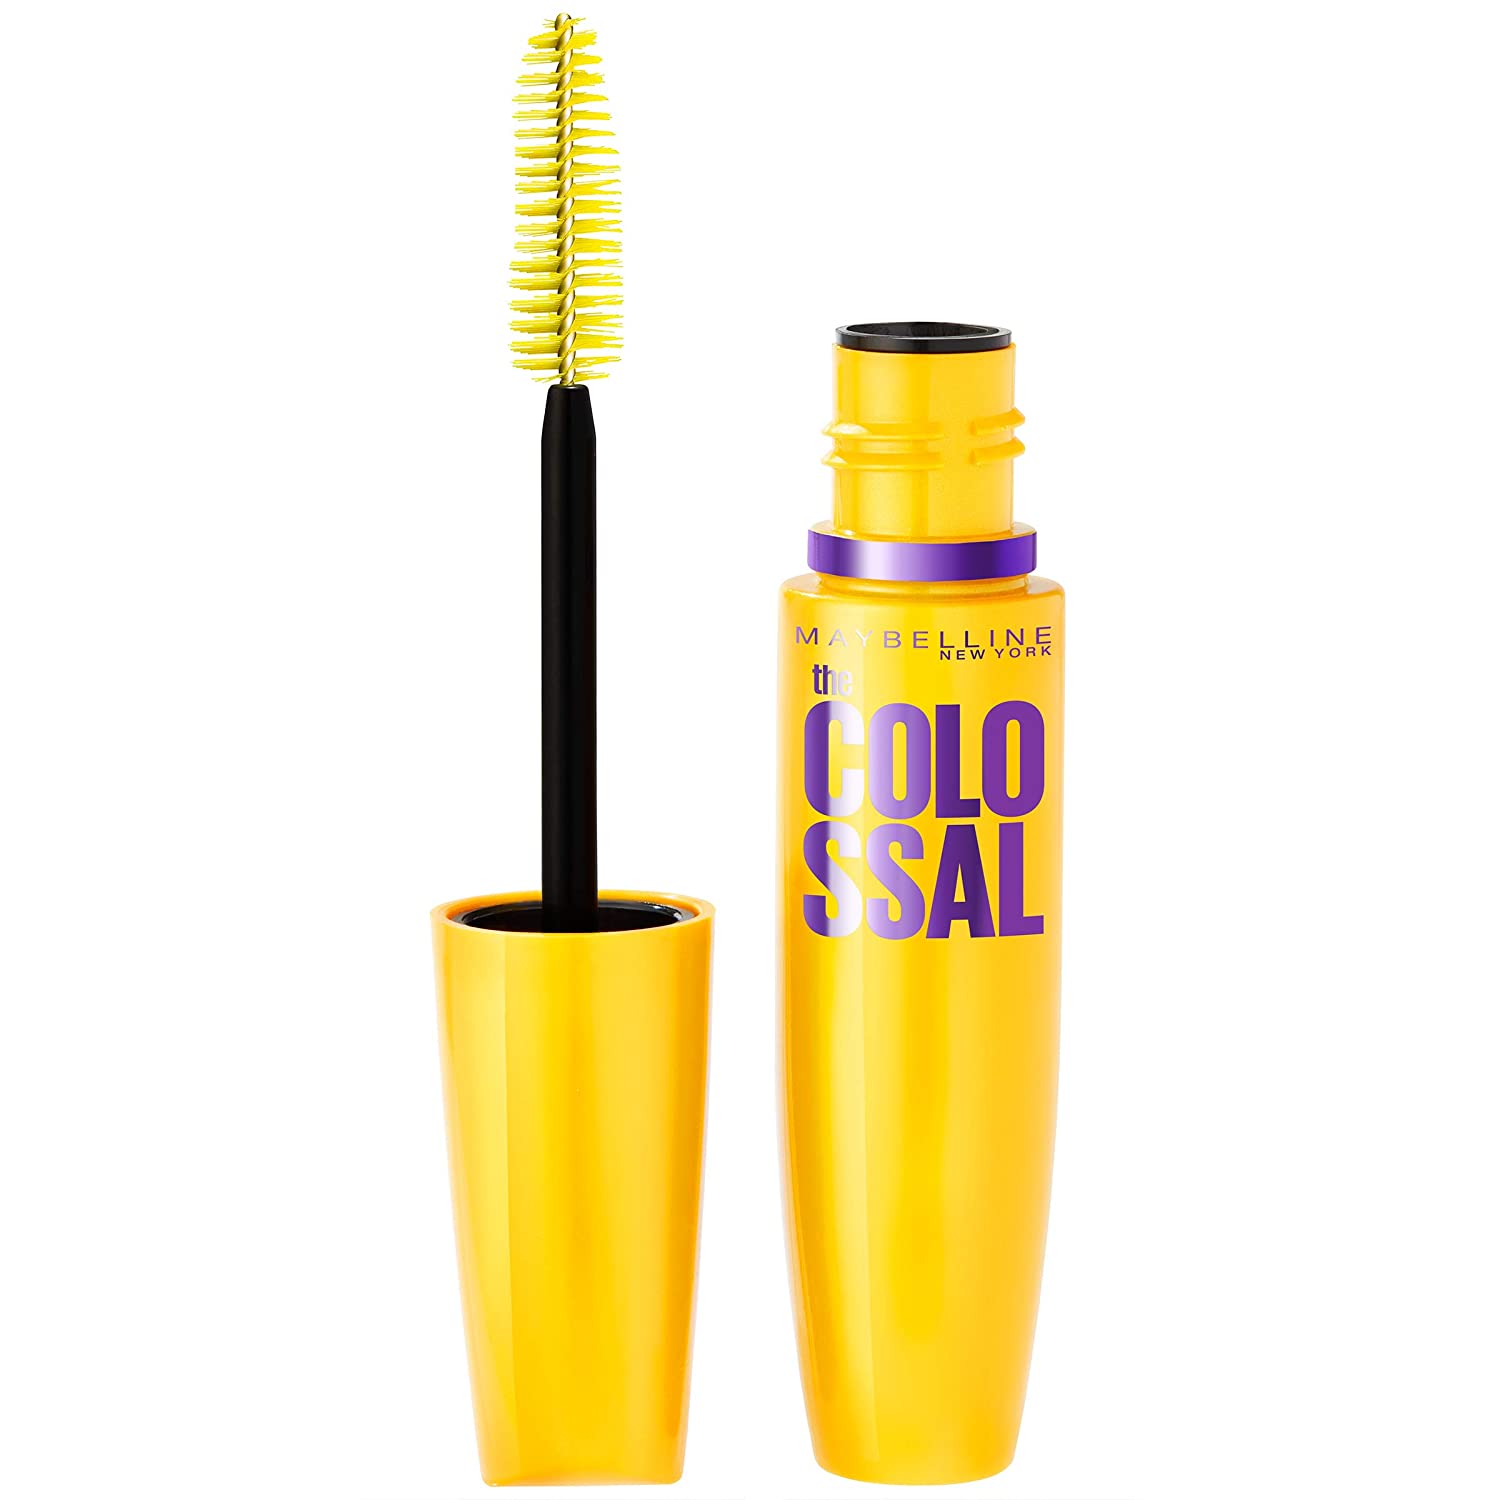 Colossal Volume Express Mascara - Colossal Volume Express Maybelline